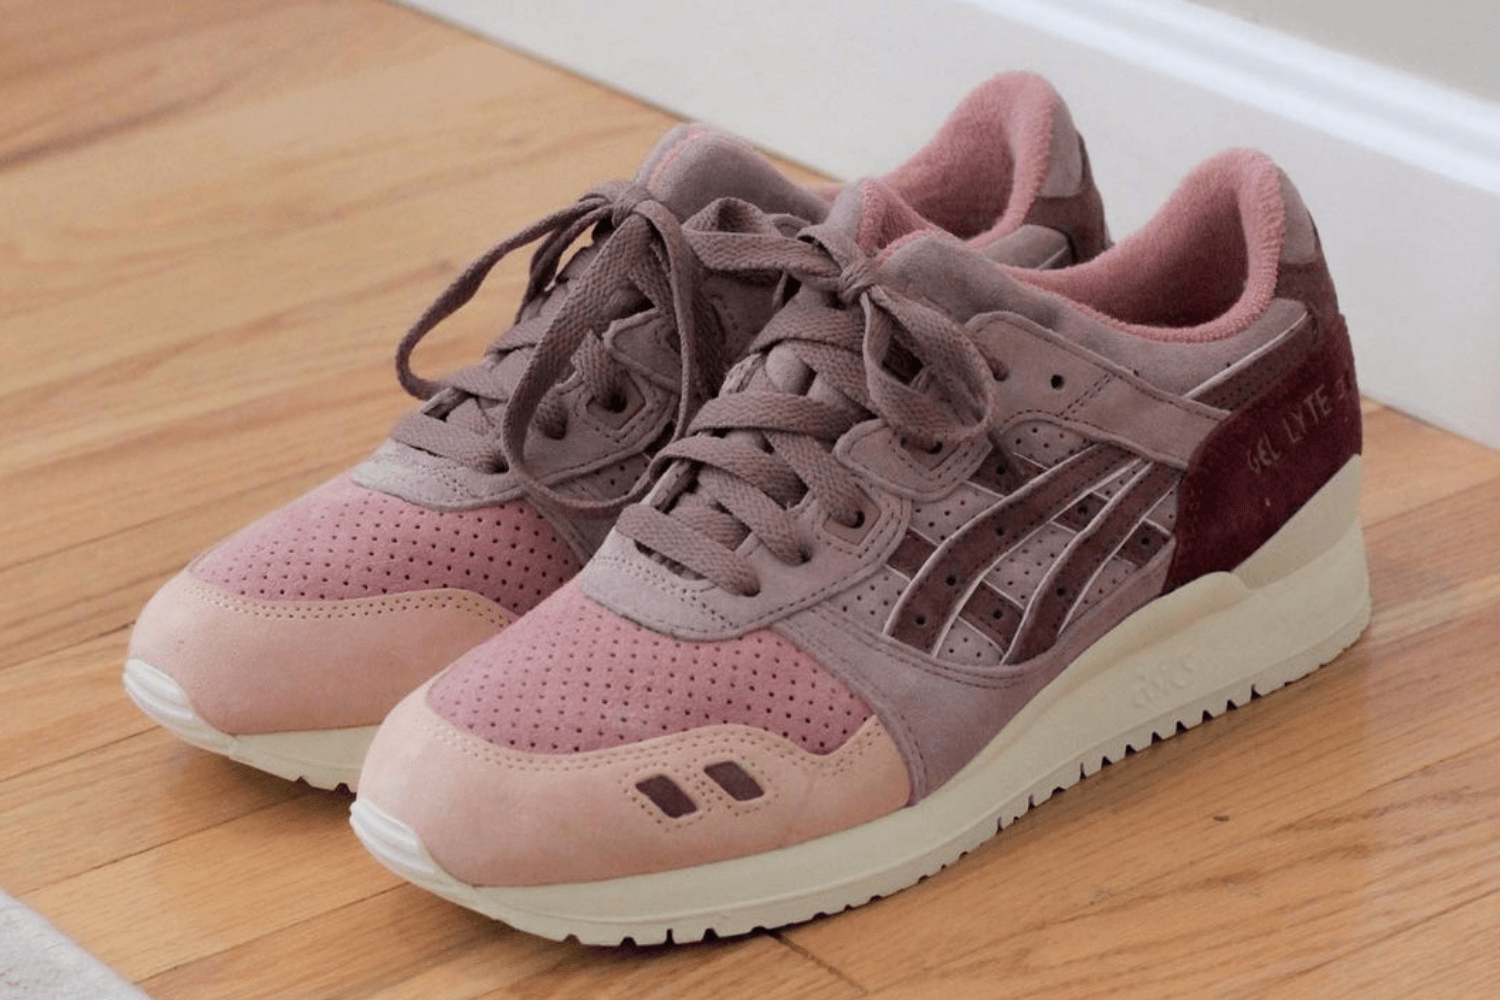 Kith x ASICS GEL-LYTE III 'By Invitation Only' release